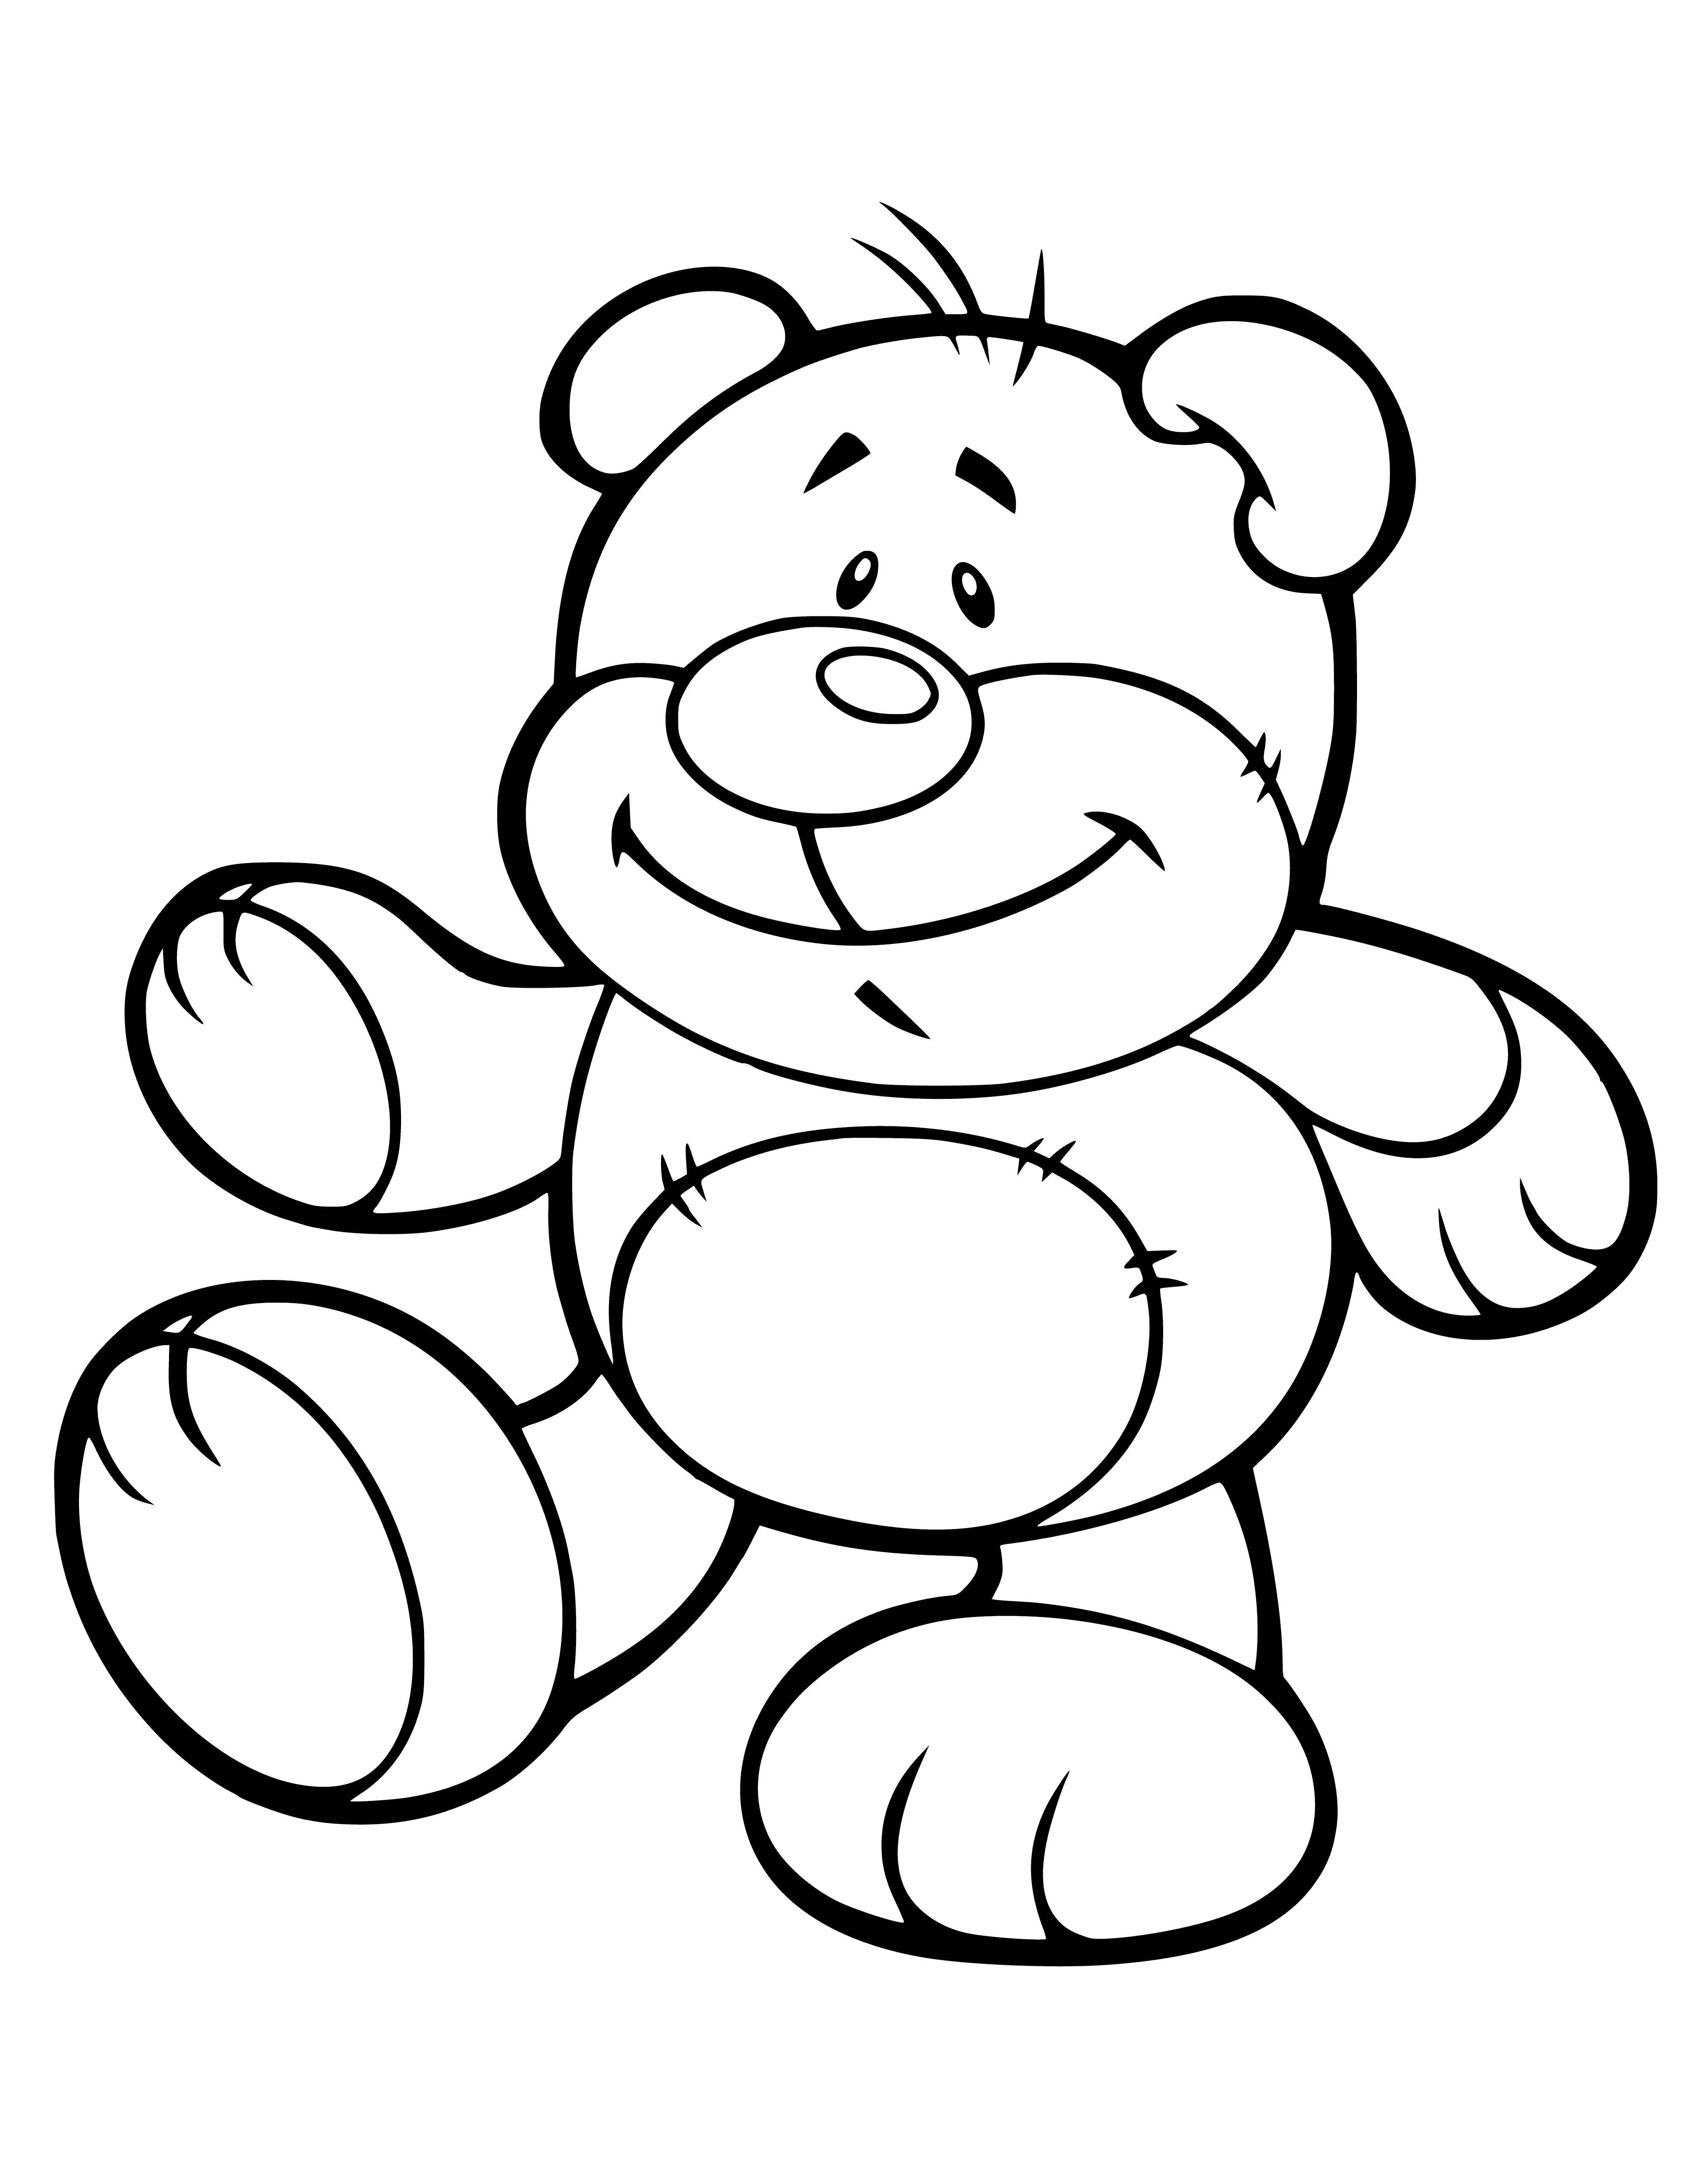 coloring page: Cute brown teddy bear with black nose & missing ear, sitting with tongue out & arms by side.